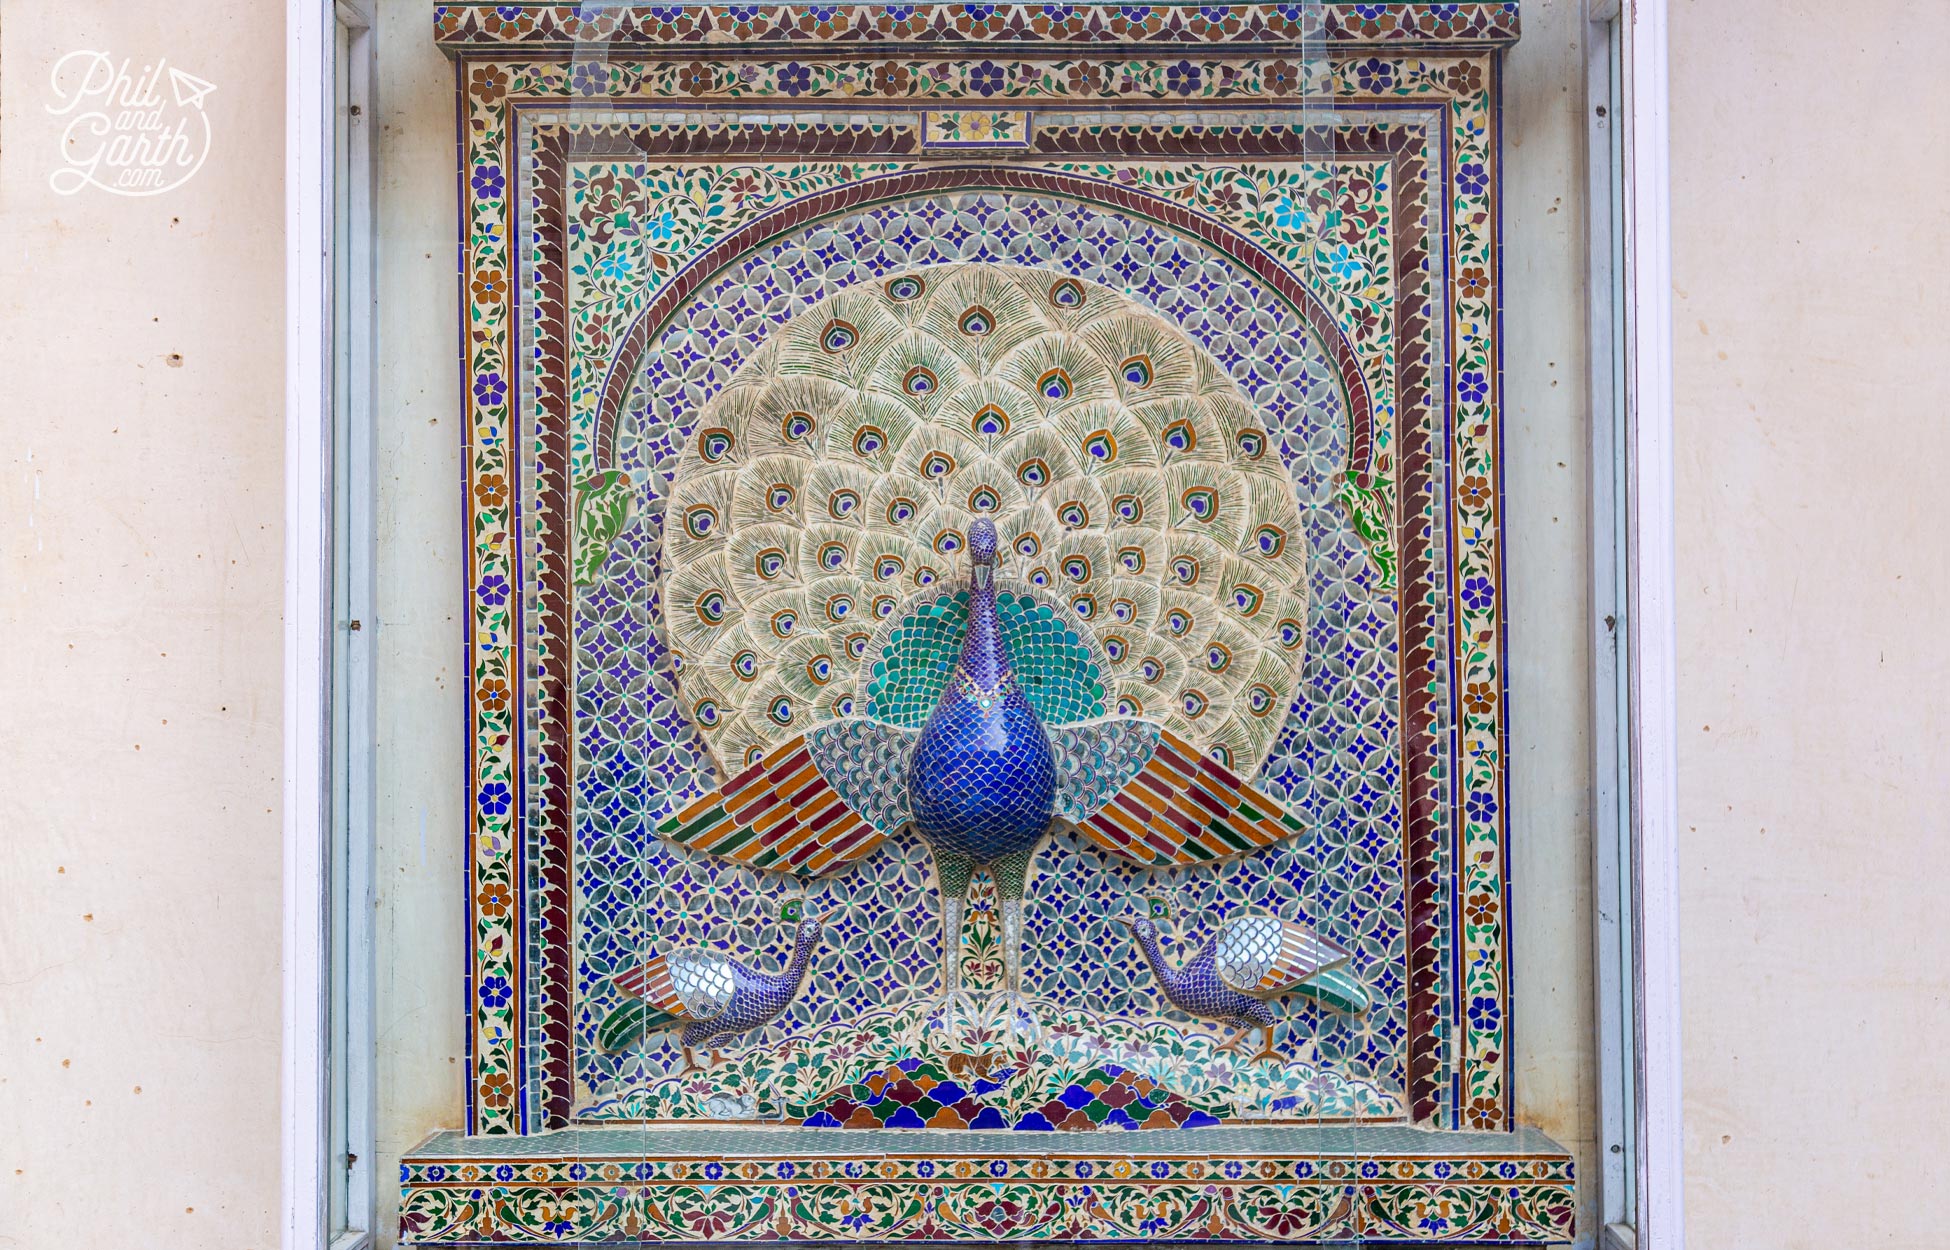 The highlight of Mor Chowk are 3 mosaic peacocks which represent summer, winter and the monsoon seasons